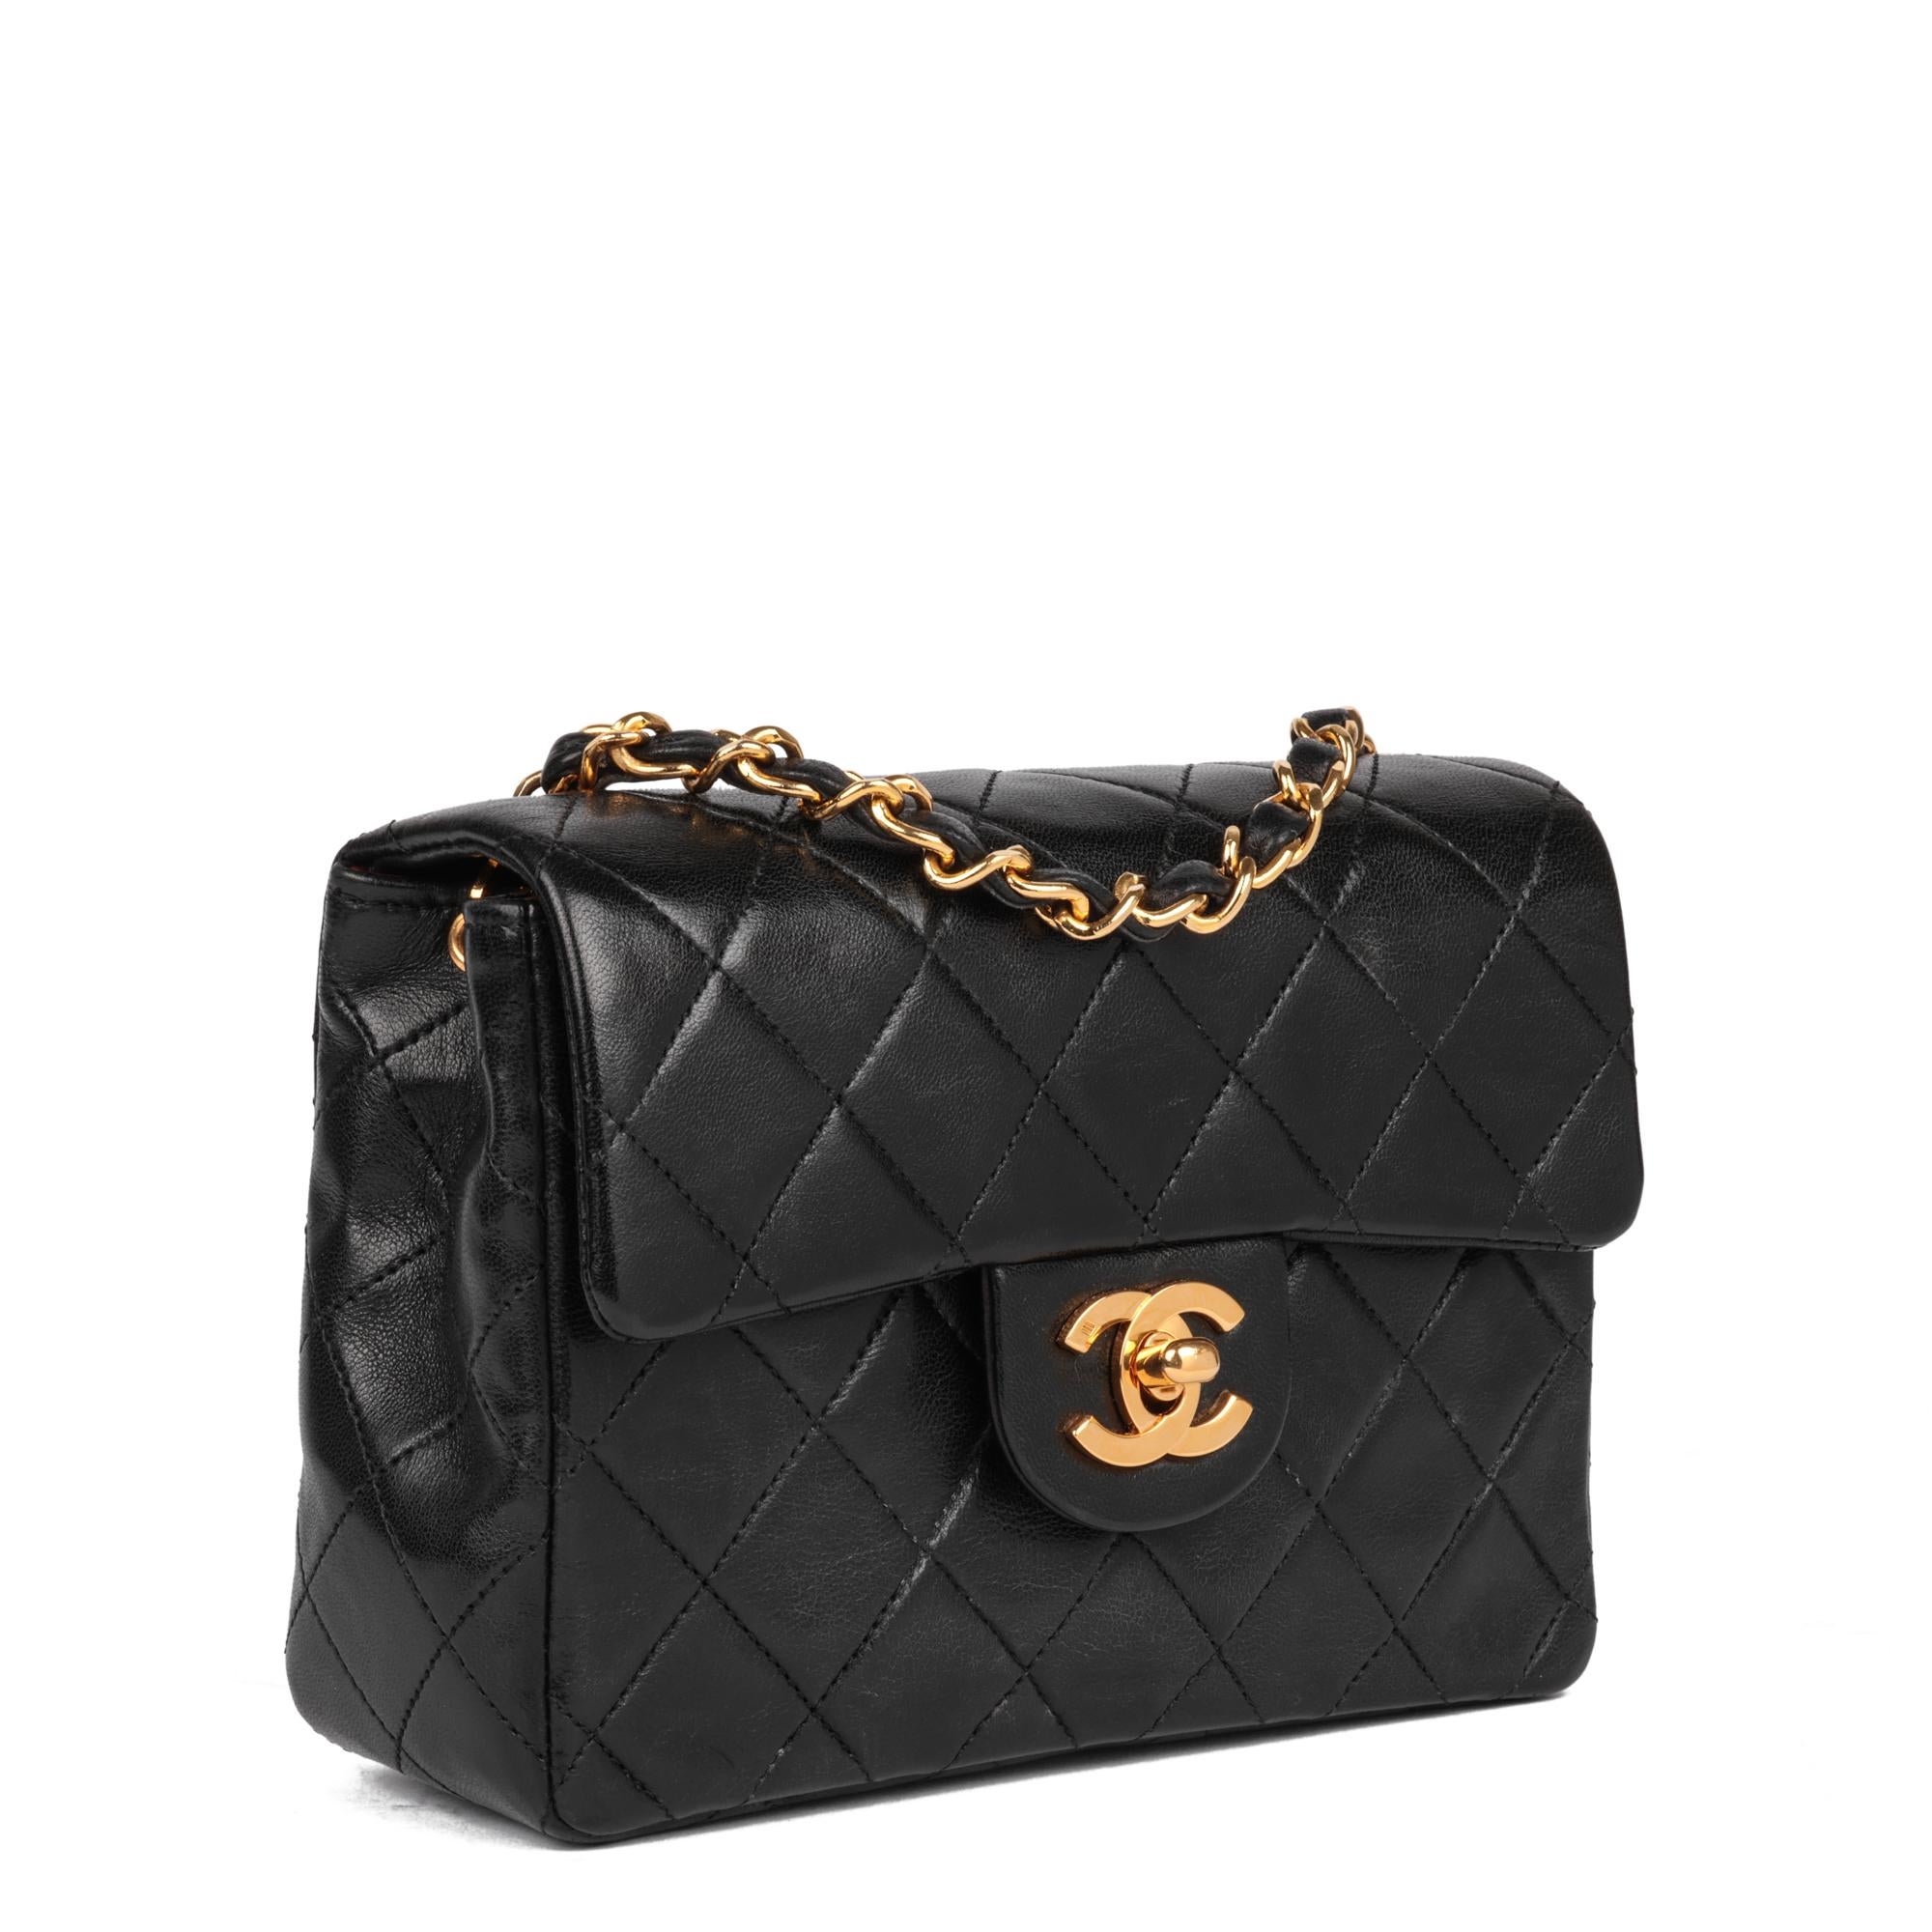 CHANEL
Black Quilted Lambskin Vintage Square Mini Flap Bag

Xupes Reference: HB5231
Serial Number: 1511426
Age (Circa): 1990
Accompanied By: Chanel Dust Bag, Authenticity Card
Authenticity Details: Authenticity Card, Serial Sticker (Made in